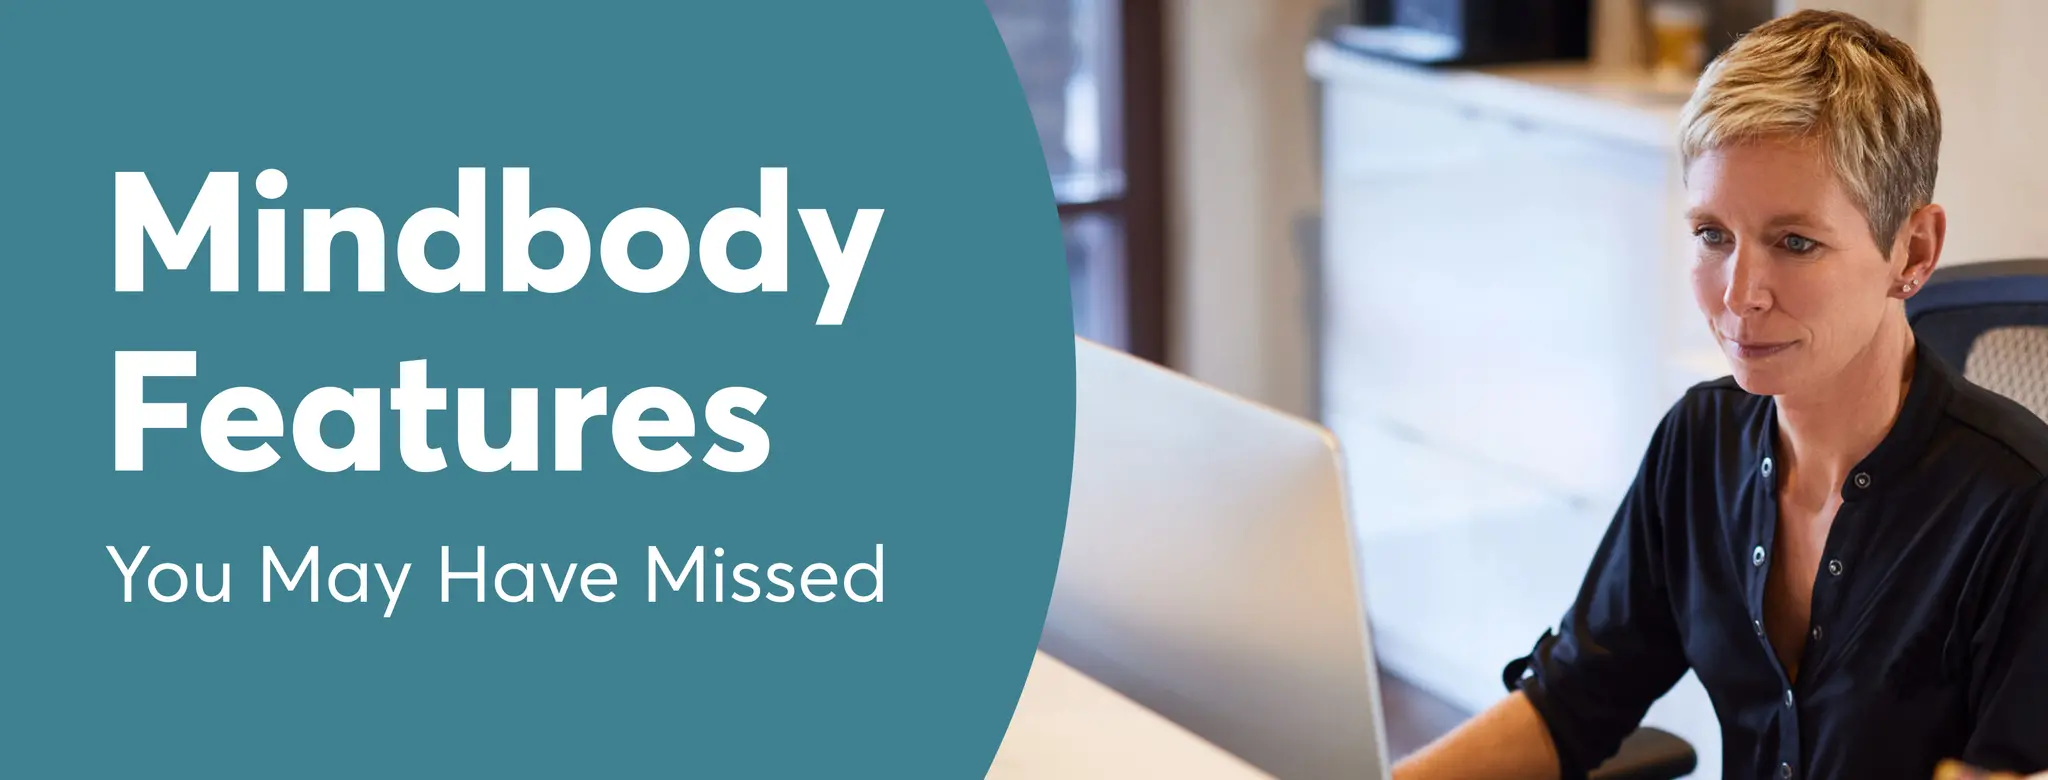 Mindbody Features You May Have Missed